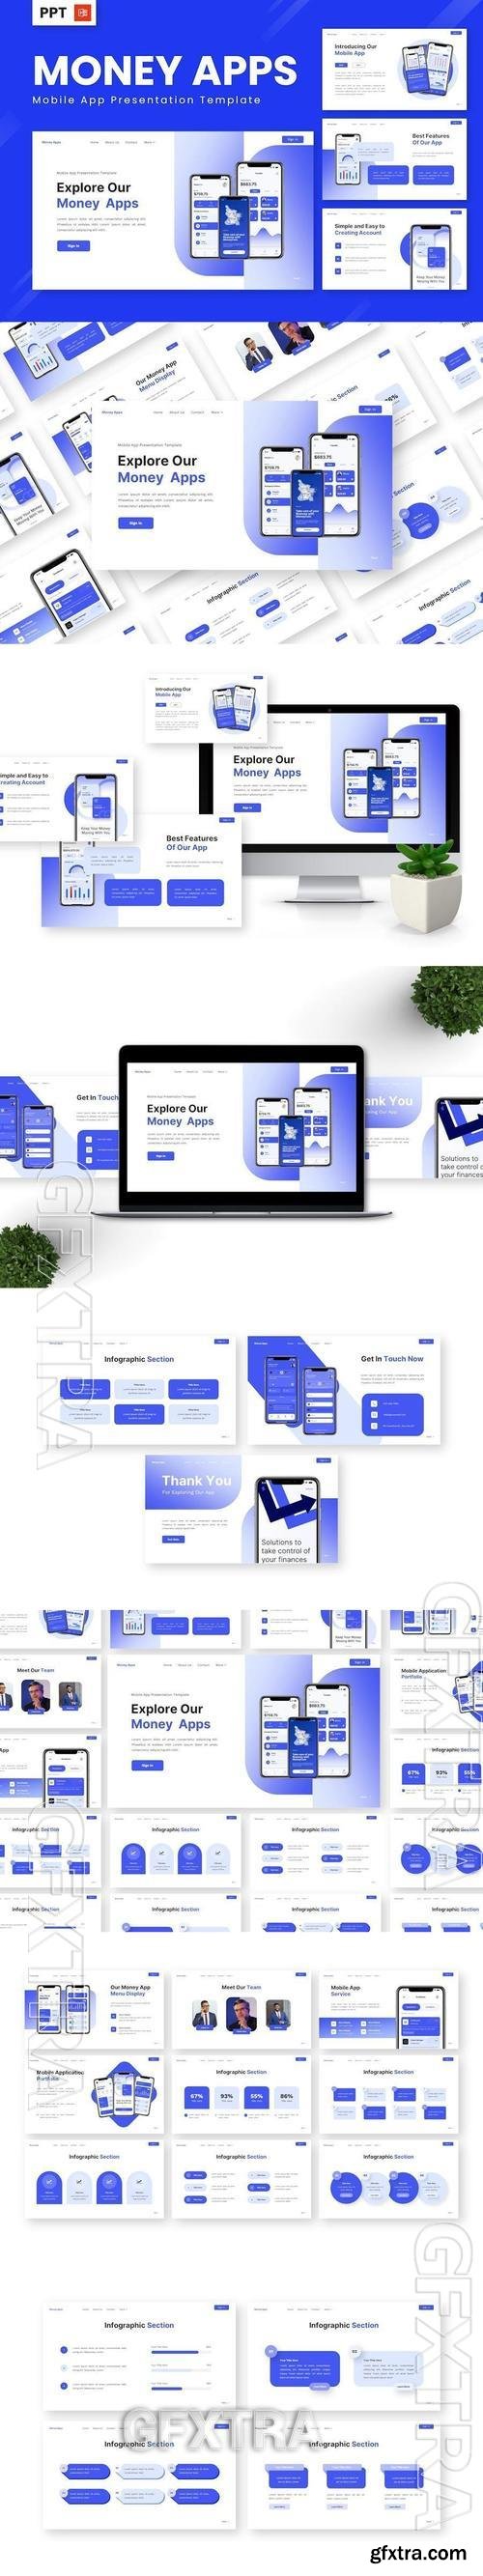 Money Apps - Mobile App Powerpoint Templates WE2XKYD